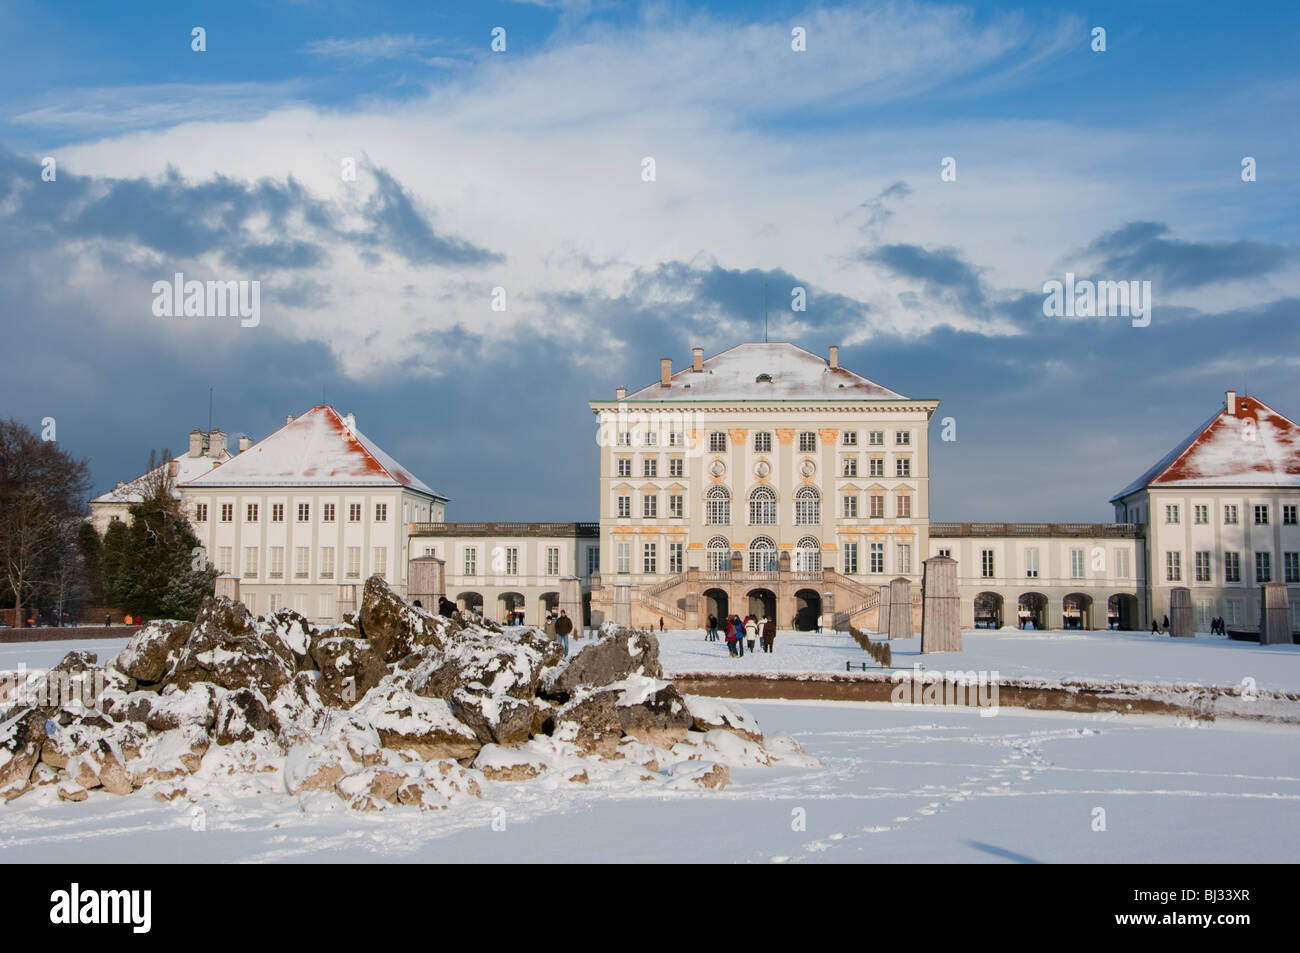 Nymphenburg palace in Munich in winter snow Stock Photo